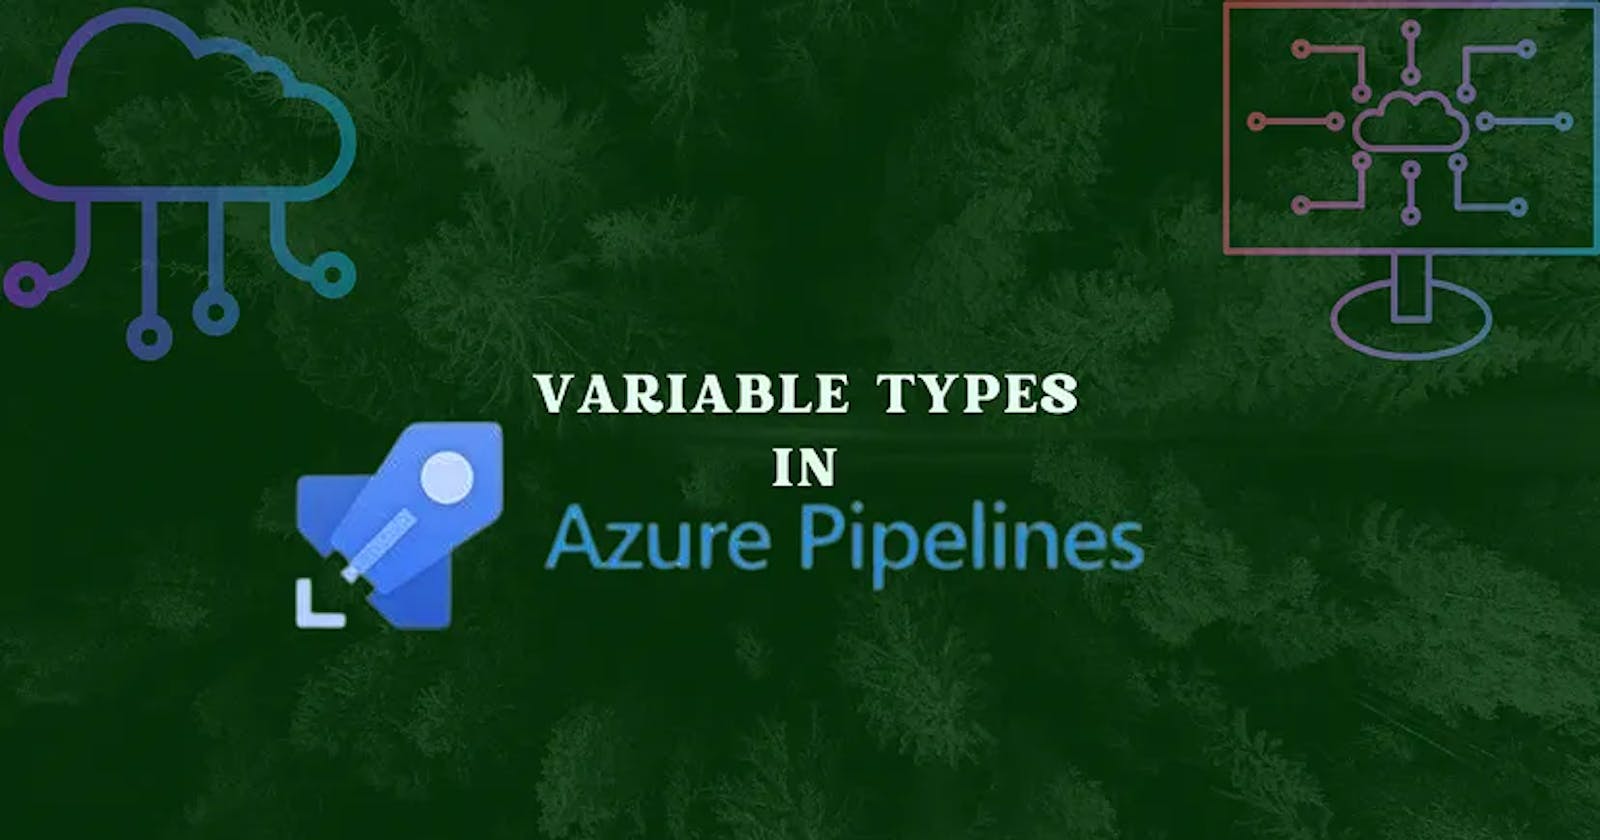 Types of Variables in Azure Pipelines?